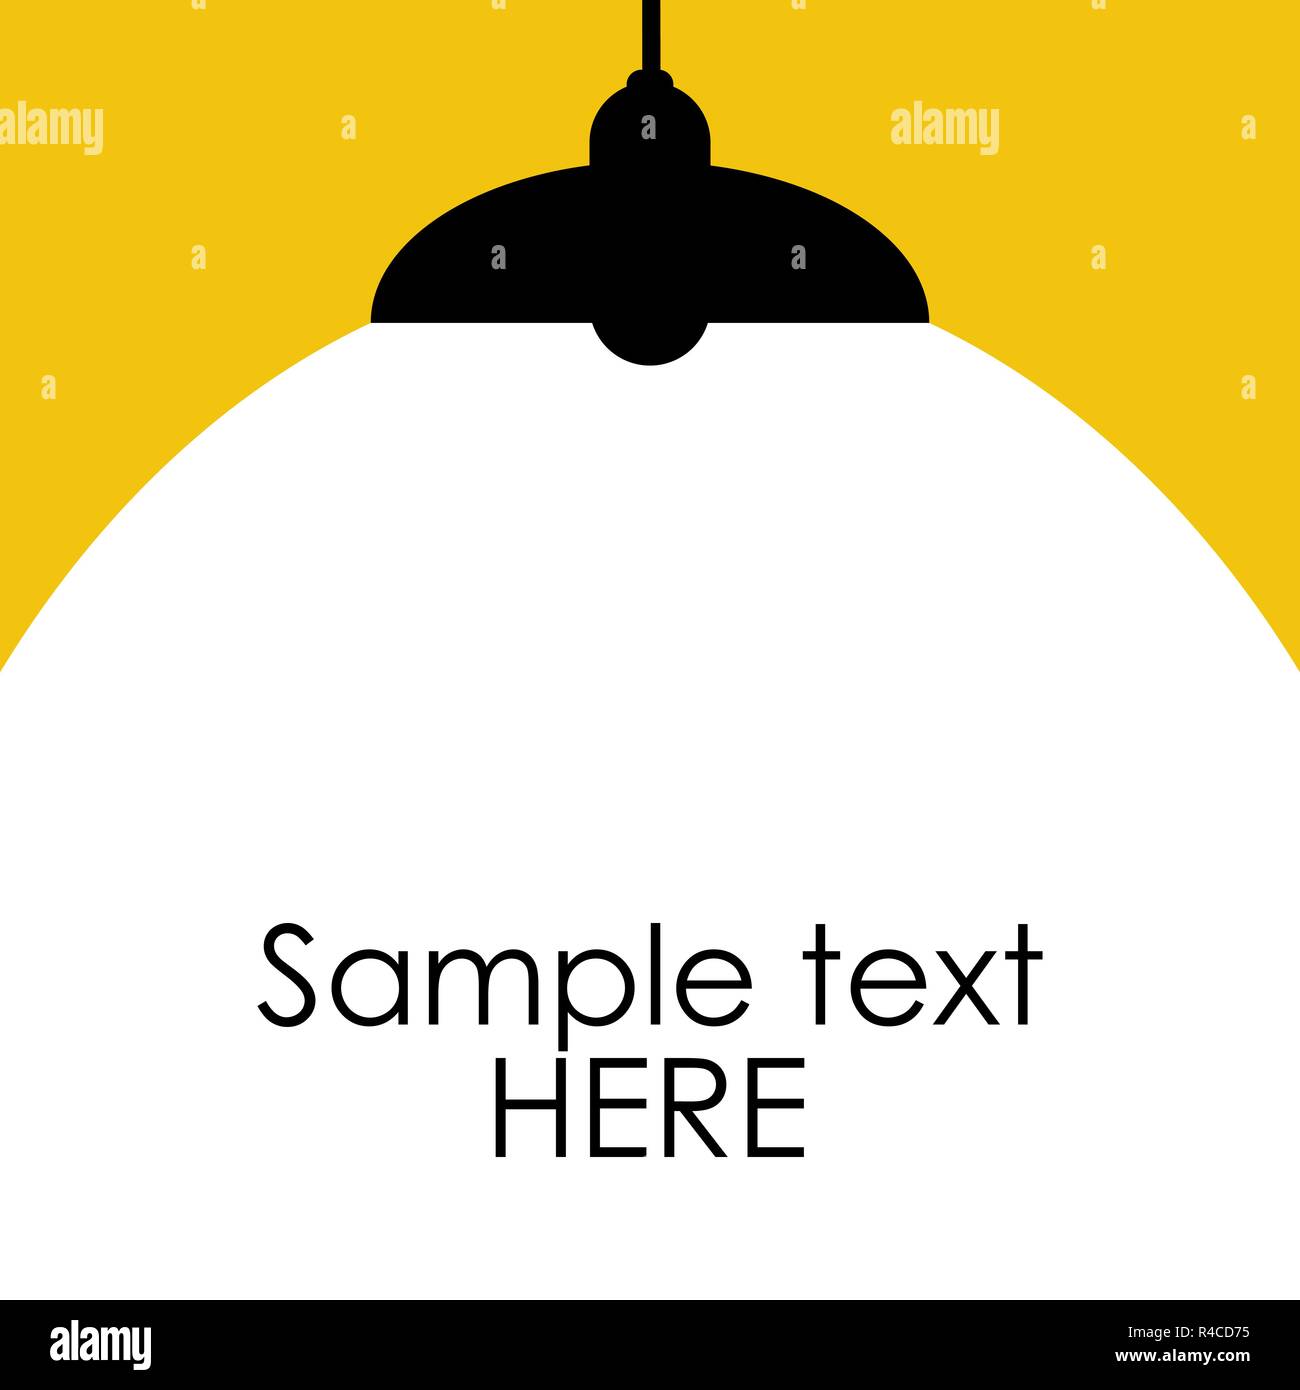 Bright Lighting Spotlights Lamp with Empty Space for Your Text or Object. Vector Illustration EPS10 Stock Vector